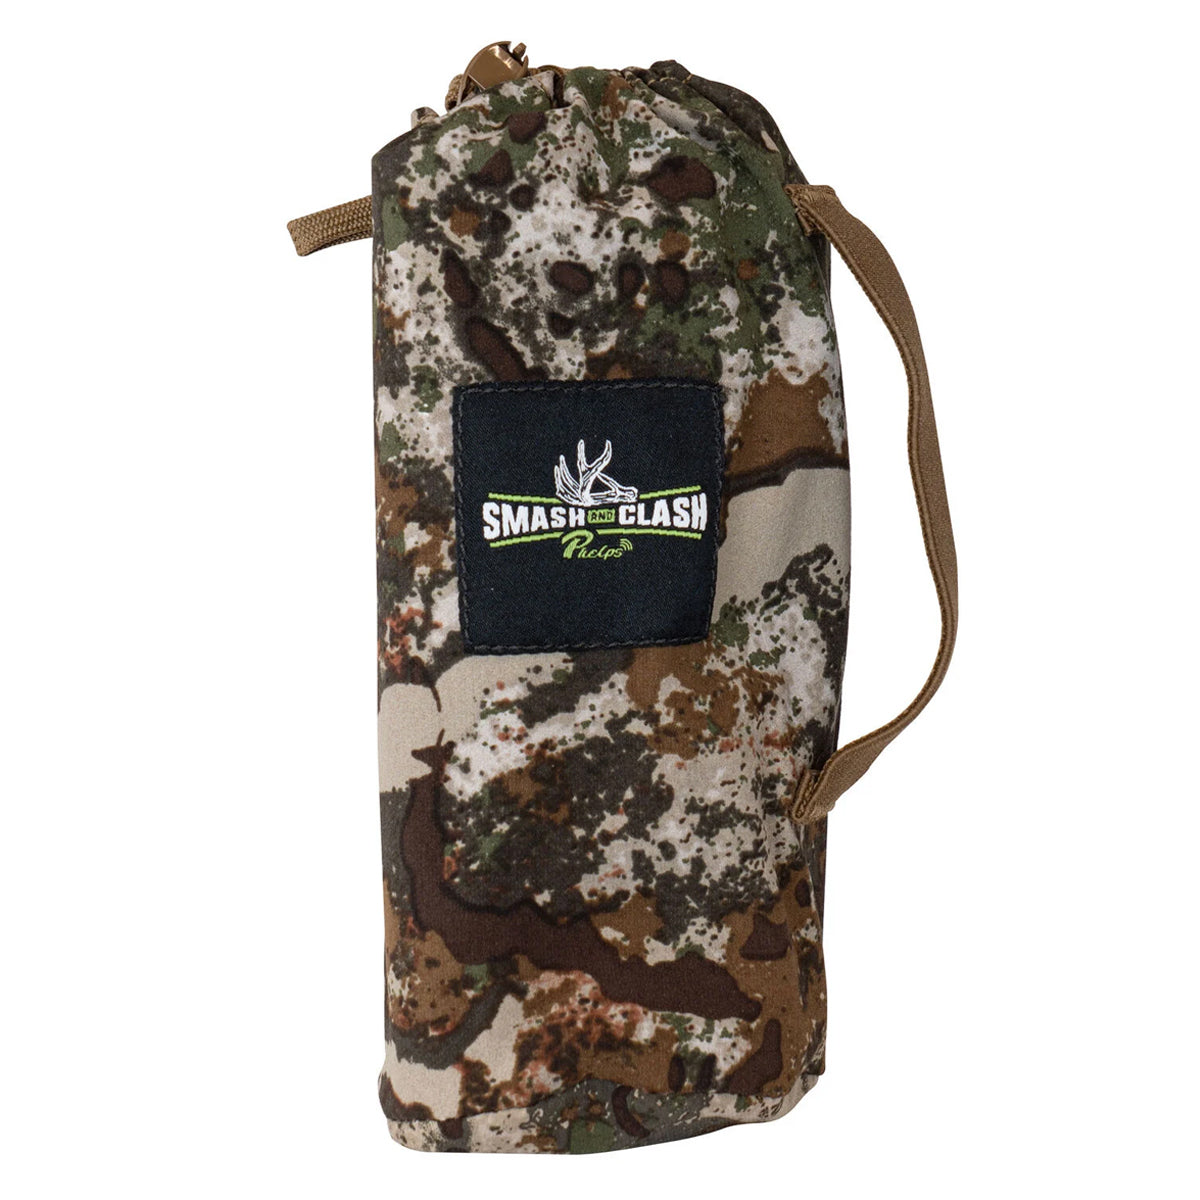 Phelps Smash and Clash Rattle Bag in  by GOHUNT | Phelps Game Calls - GOHUNT Shop